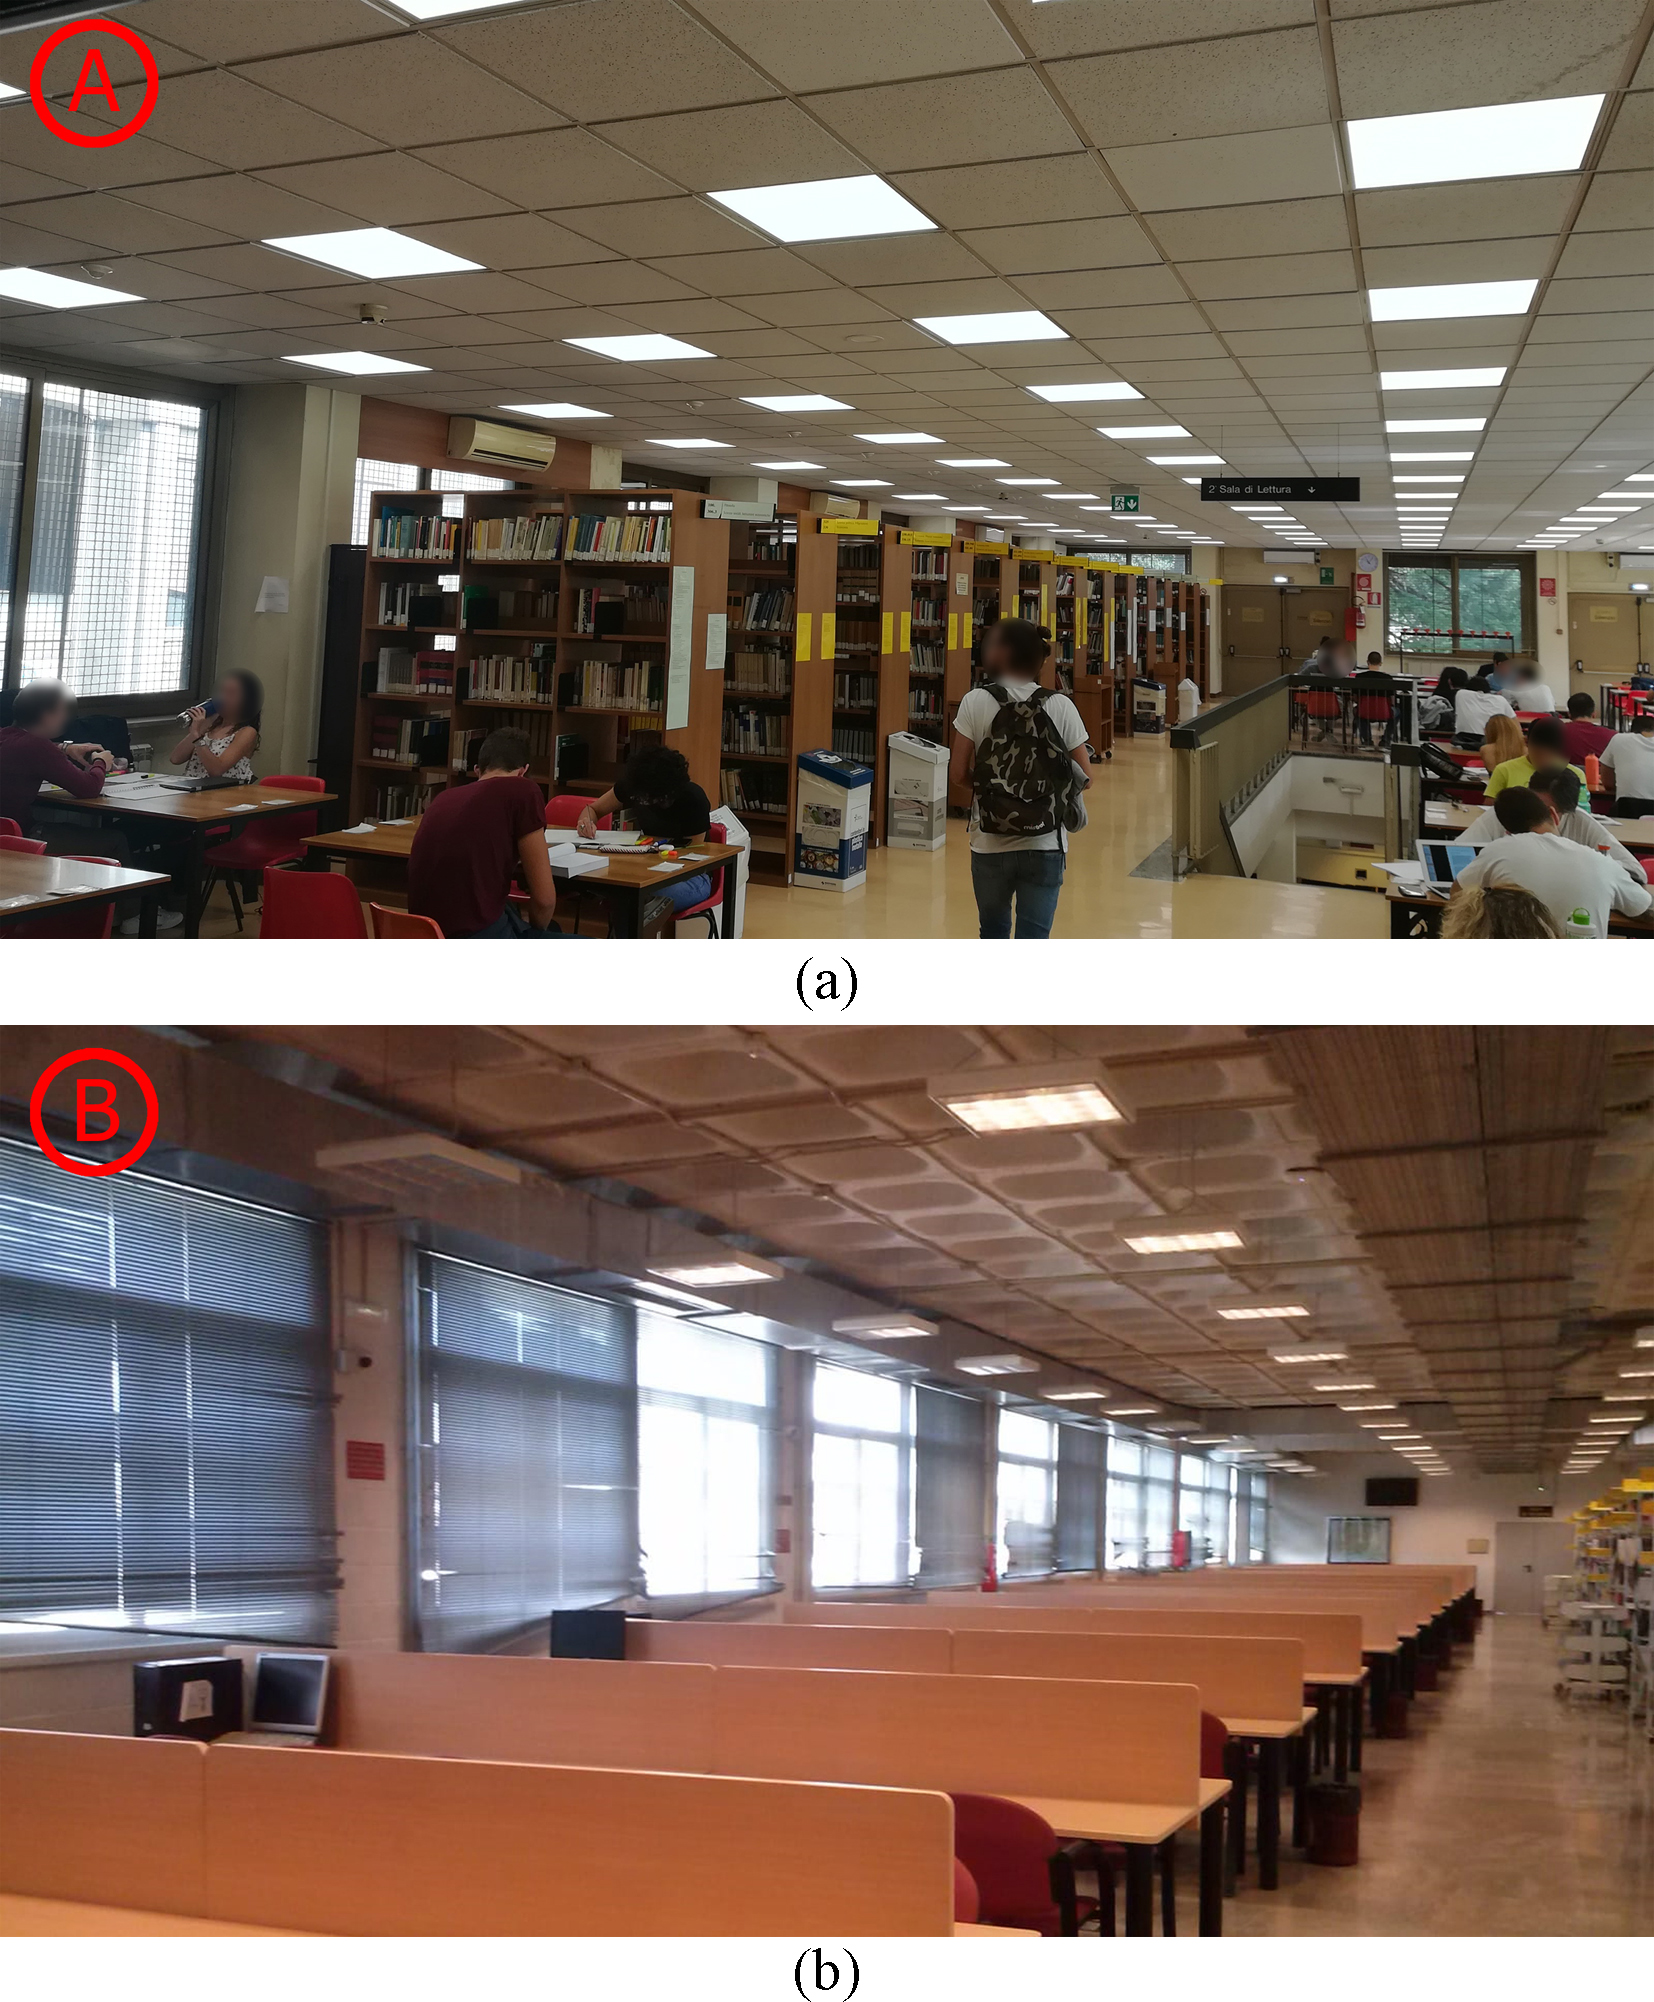 The indoor environments characterizing (a) the library belonging to Sapienza University of Rome and (b) the one belonging to the University of Granada.